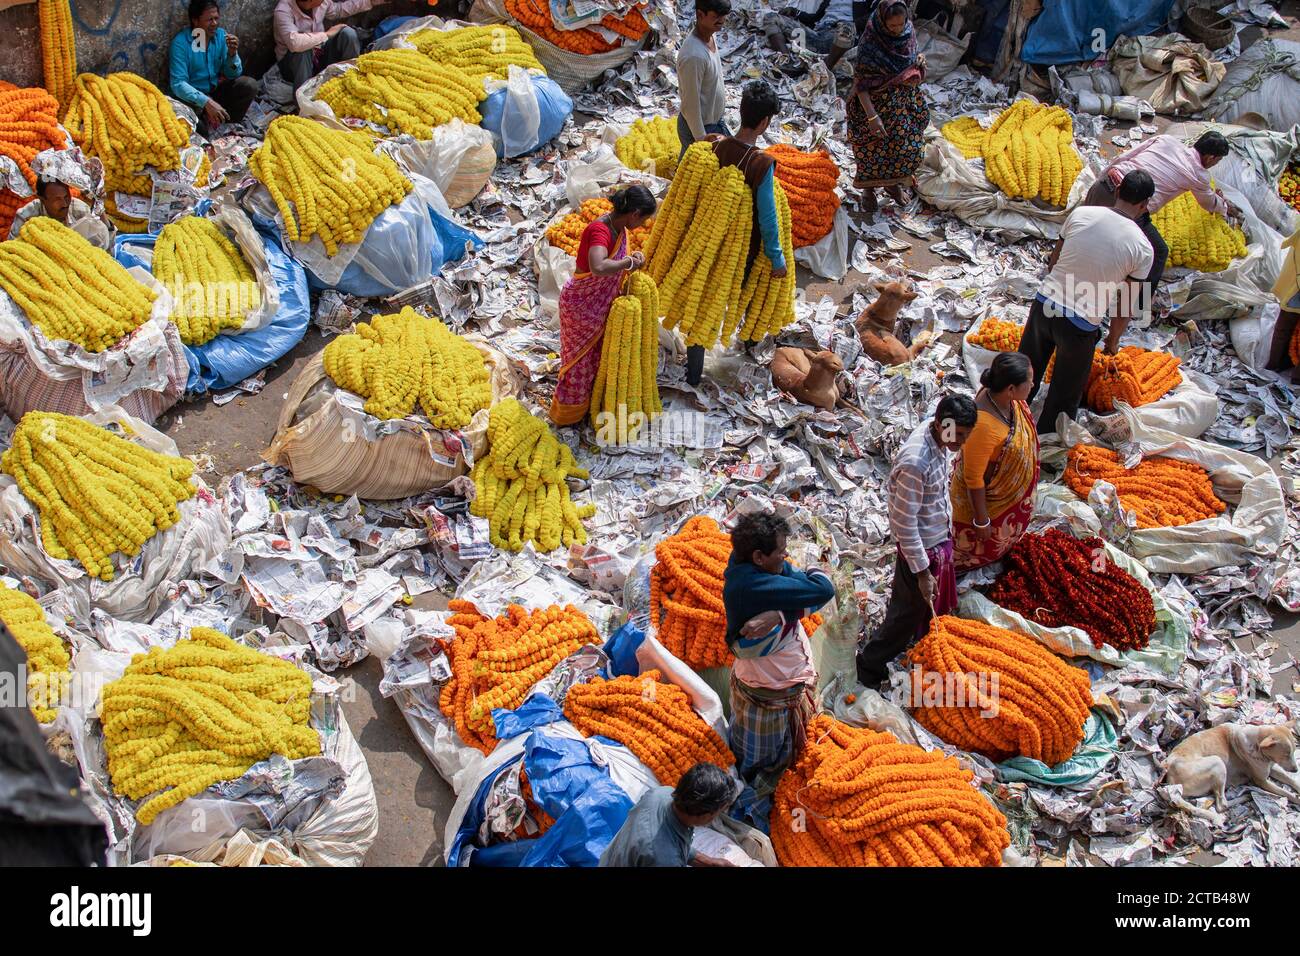 Kolkata, India - February 2, 2020: Unidentified people attends Mallick Ghat flower market by Howrah bridge to buy and sell colorful marigold flowers Stock Photo